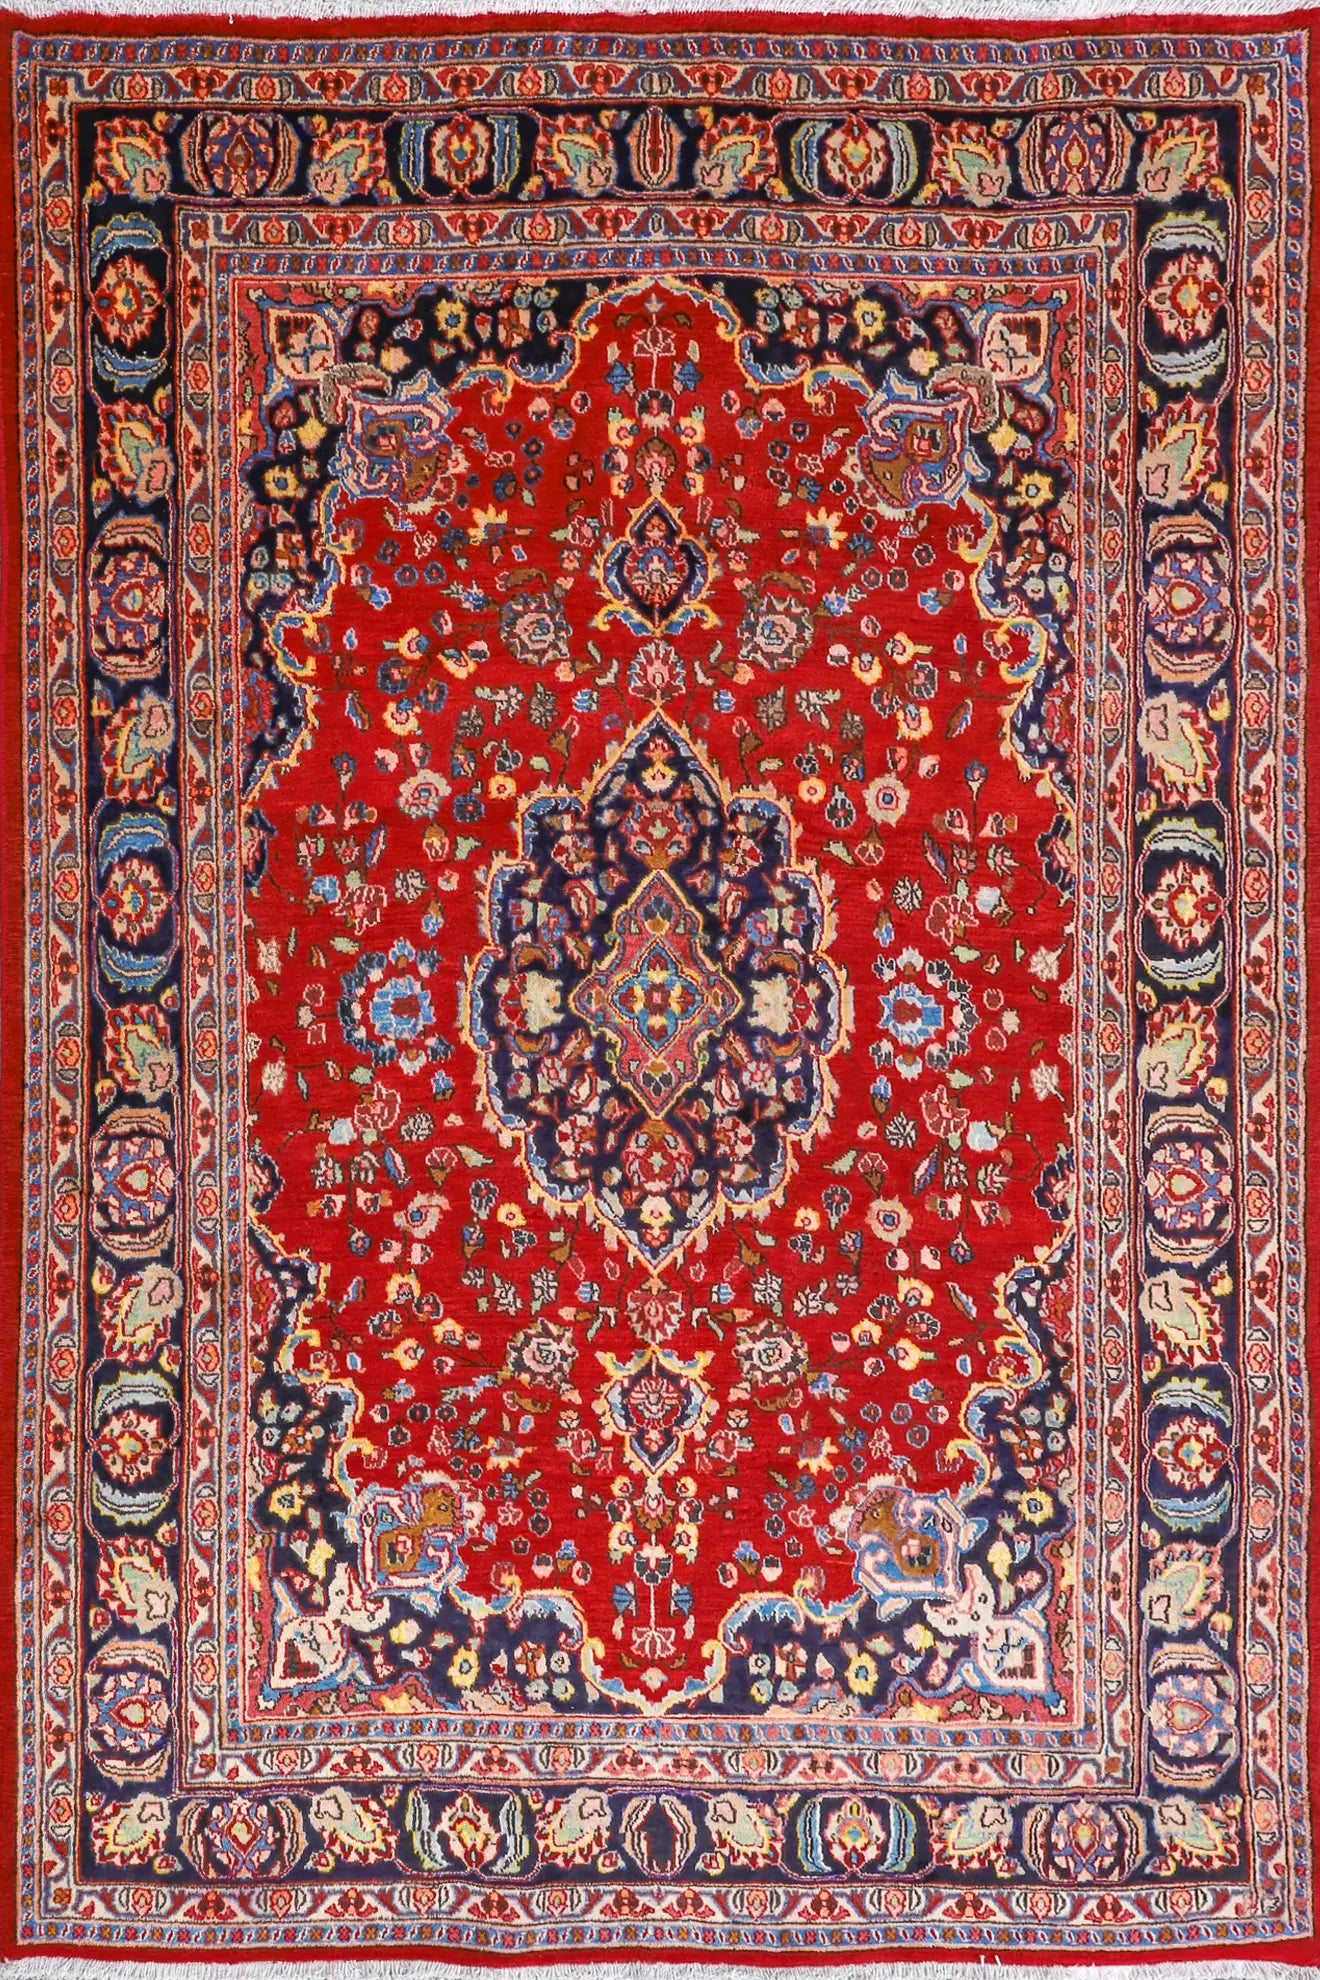 Mashad - Hand-Knotted Wool Rug - 295x200 cm